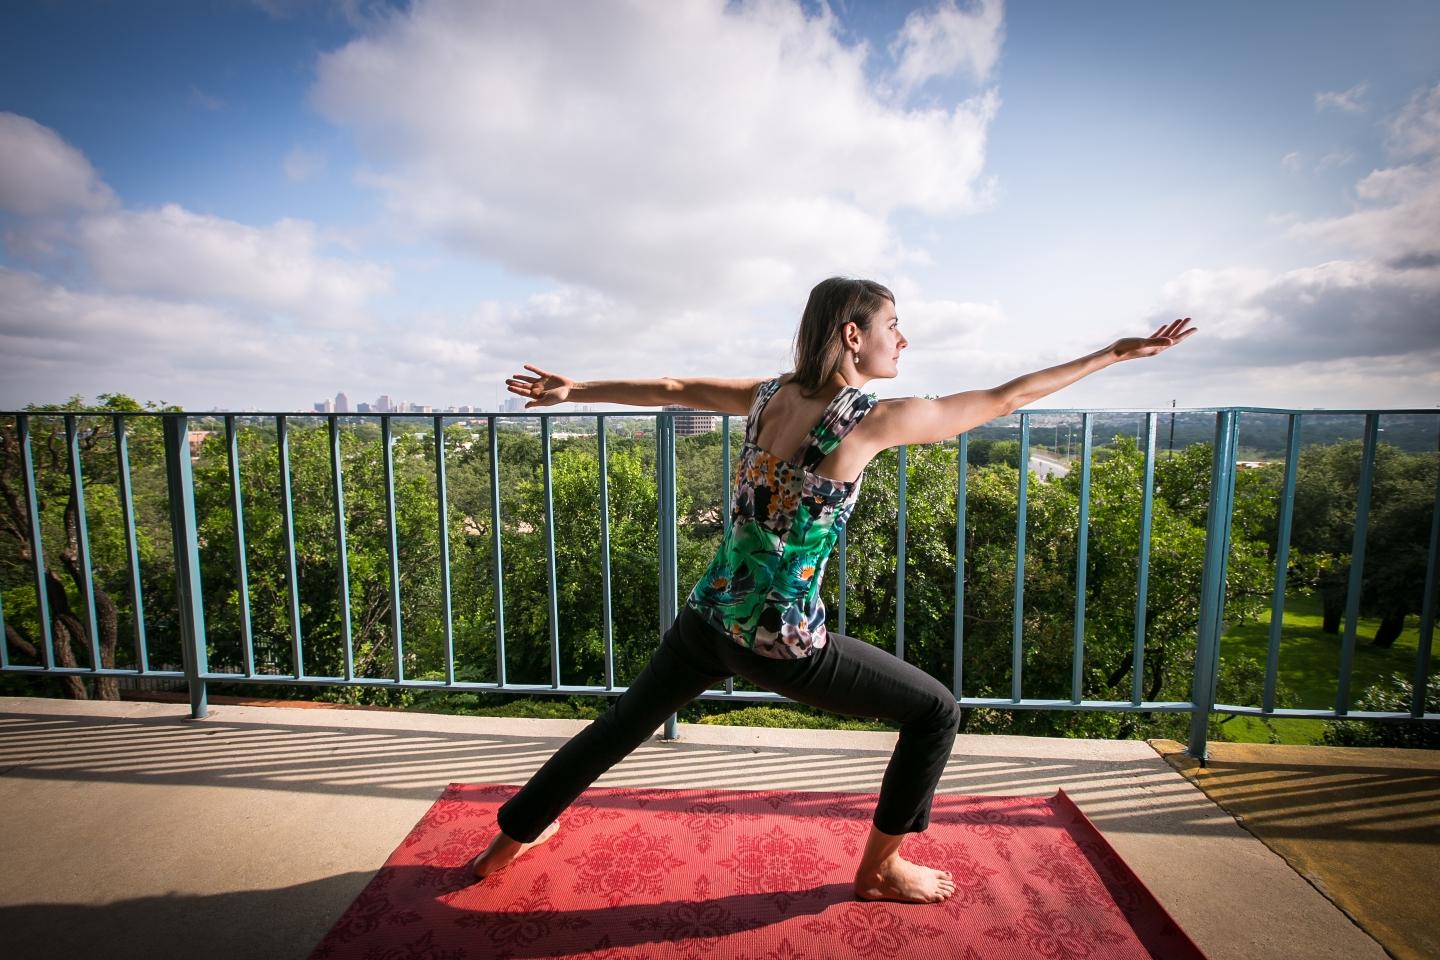 Default: Yoga with a view